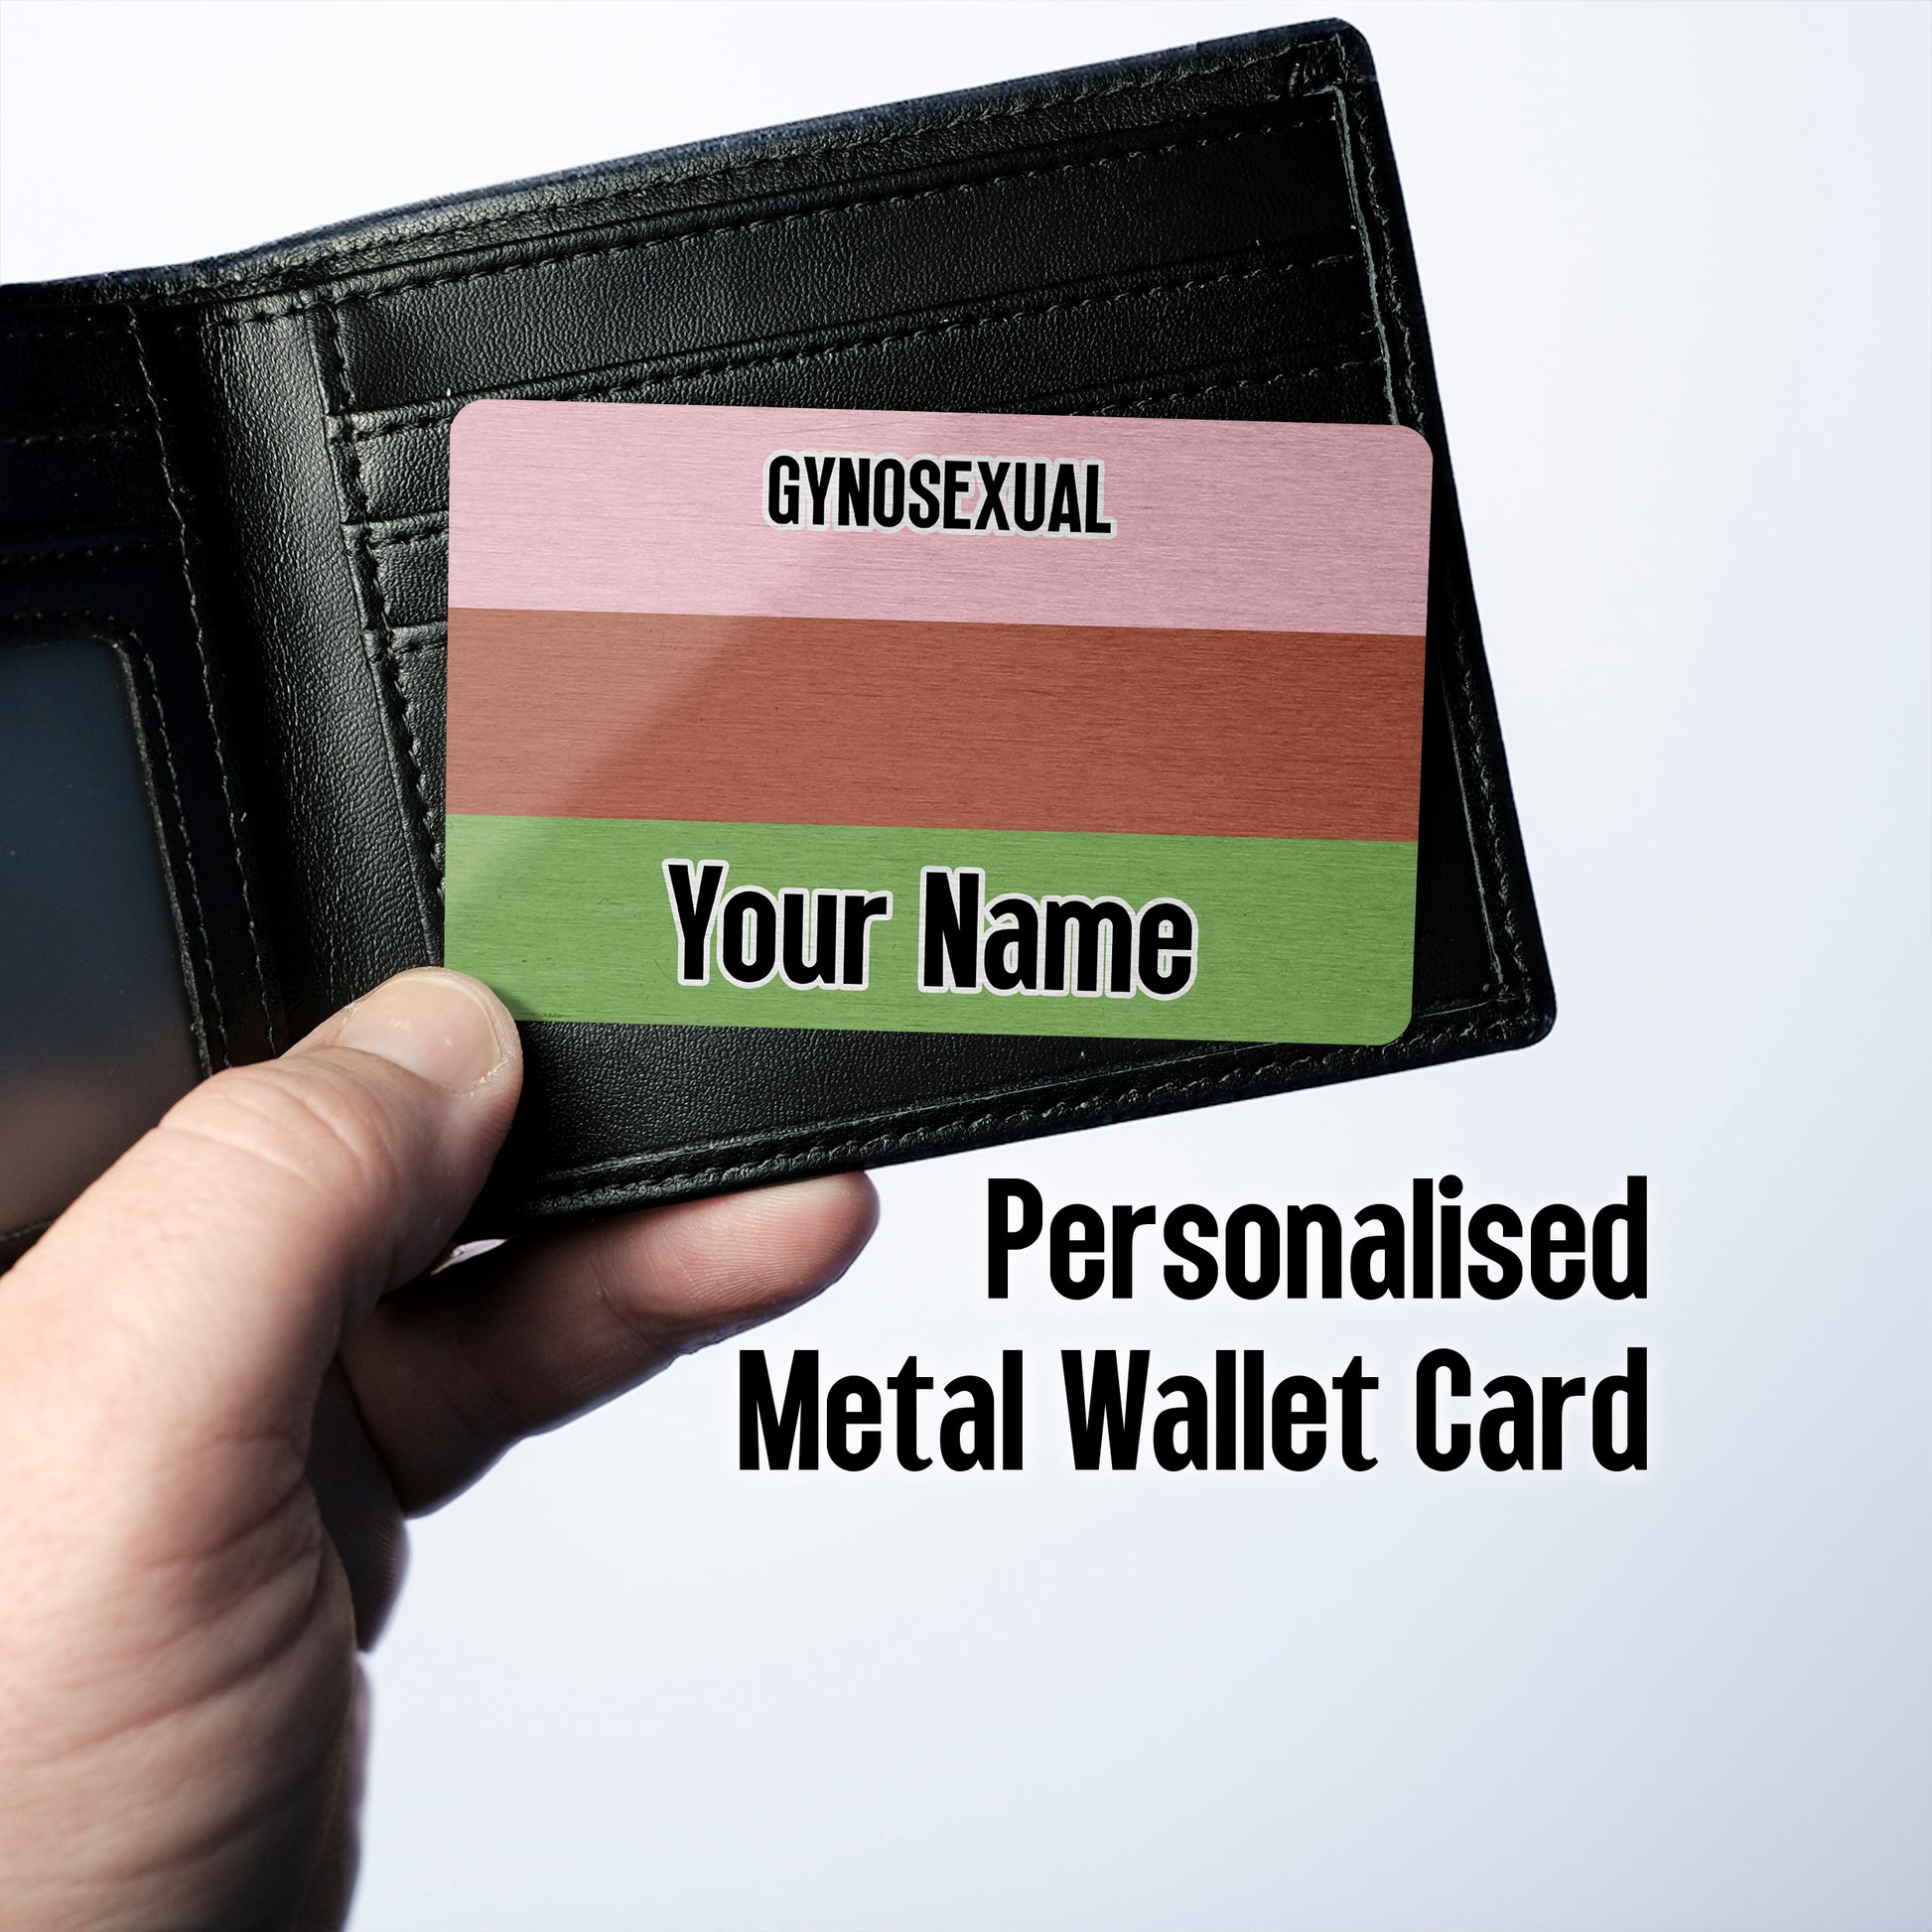 Aluminium wallet card personalised with your name and the gynosexual pride flag